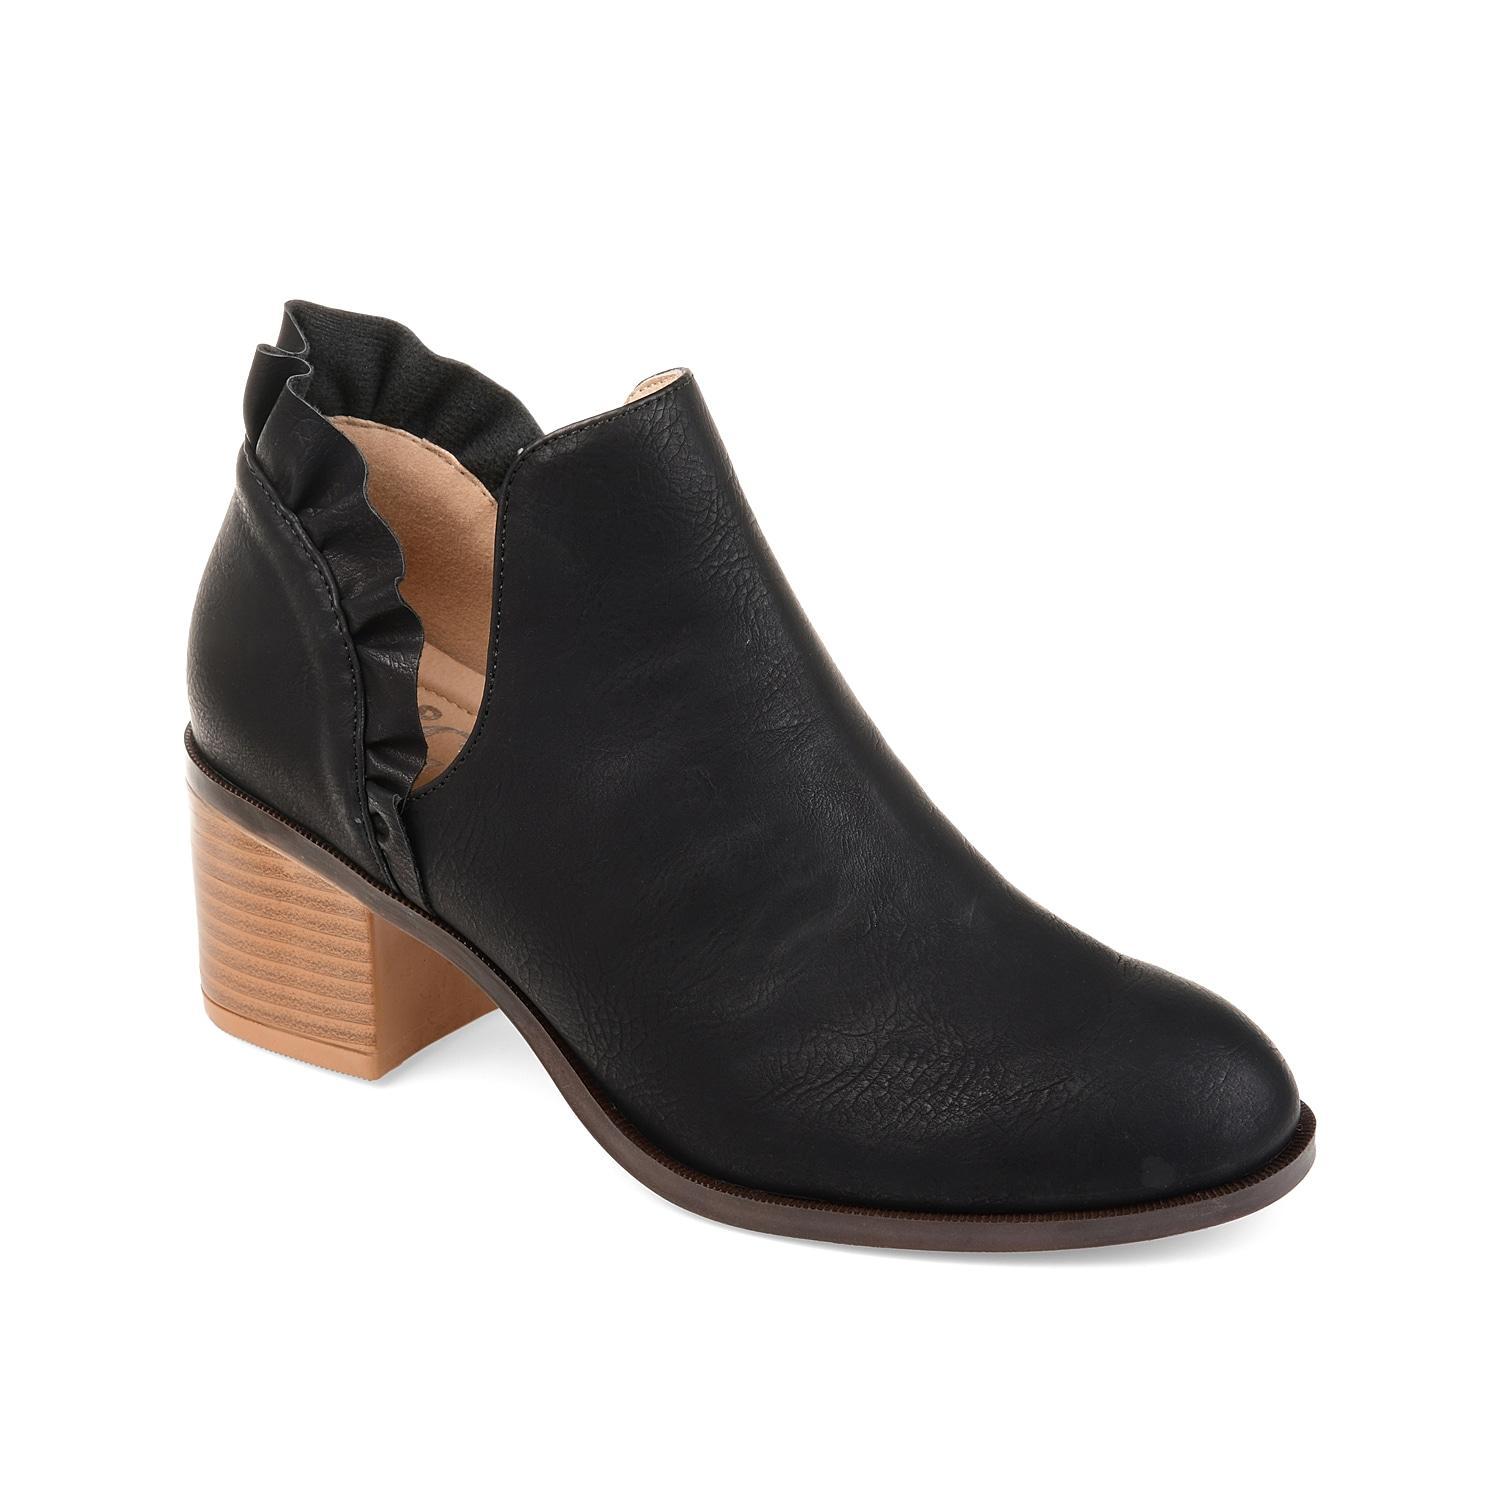 Journee Collection Lennie Womens Ankle Boots Black Product Image